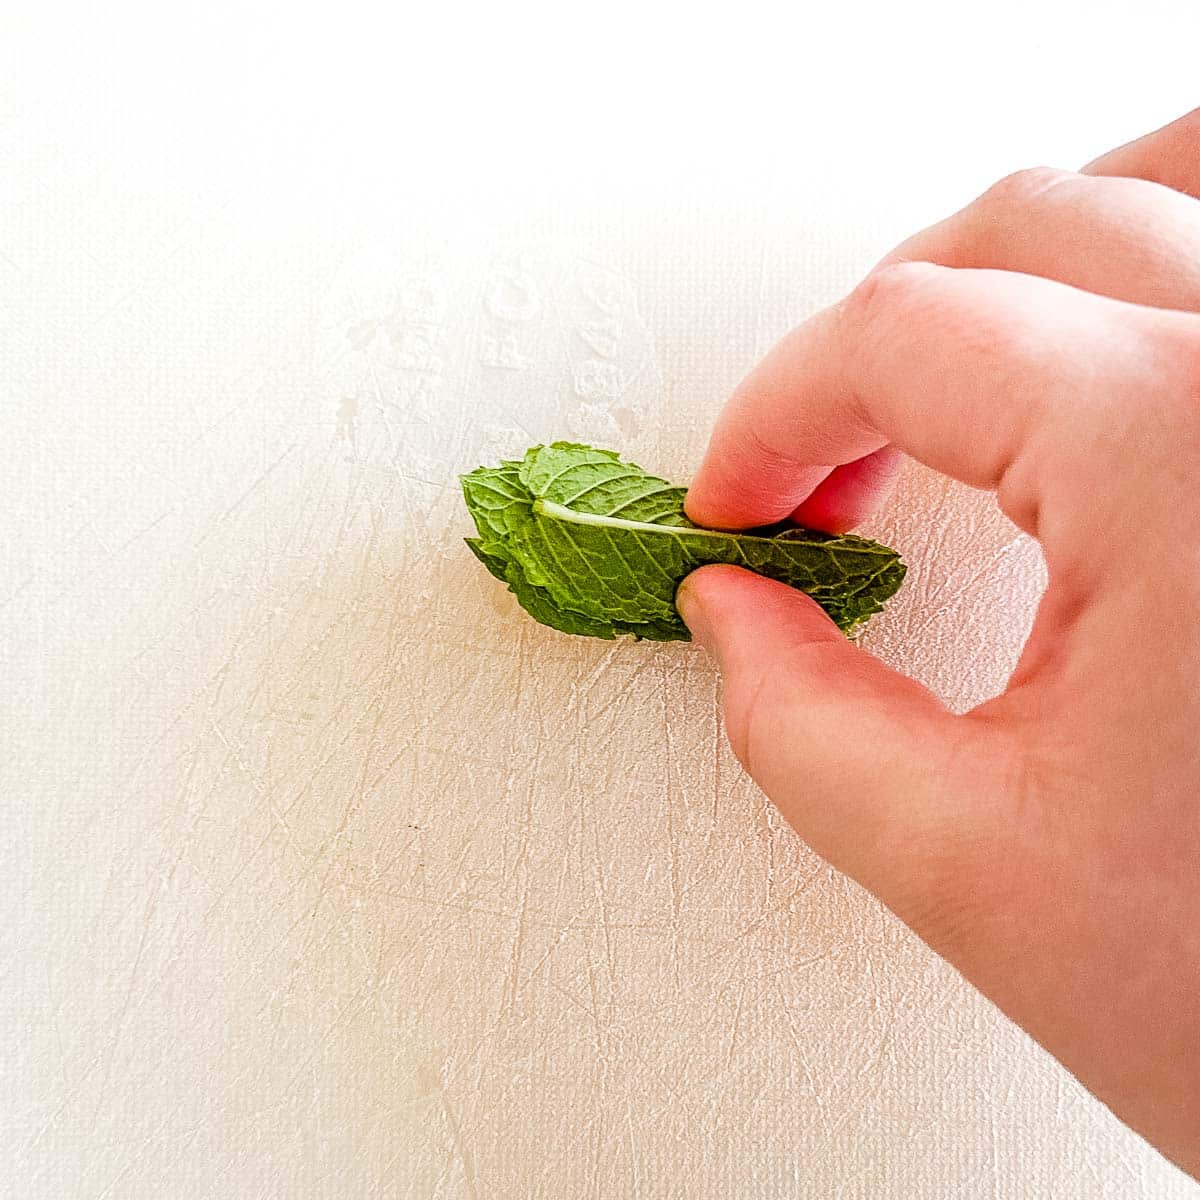 A hand holds a small pile of rolled mint leaves against a cutting board.